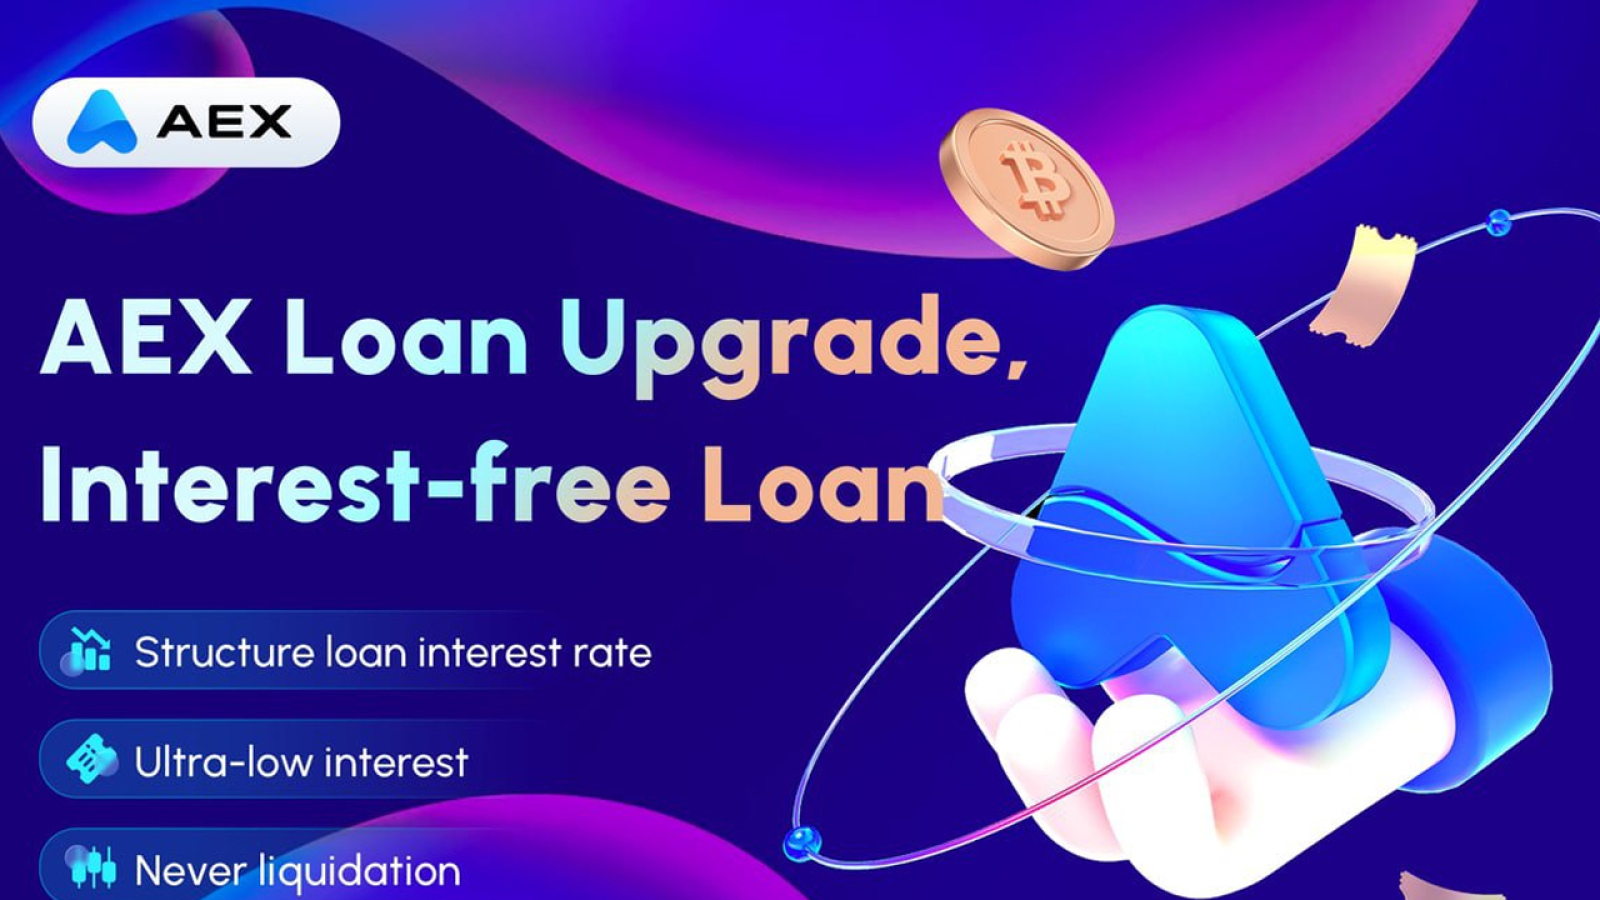 Aex Thanks All Miners With May Day and Launches an Interest-Free Loan Promotion